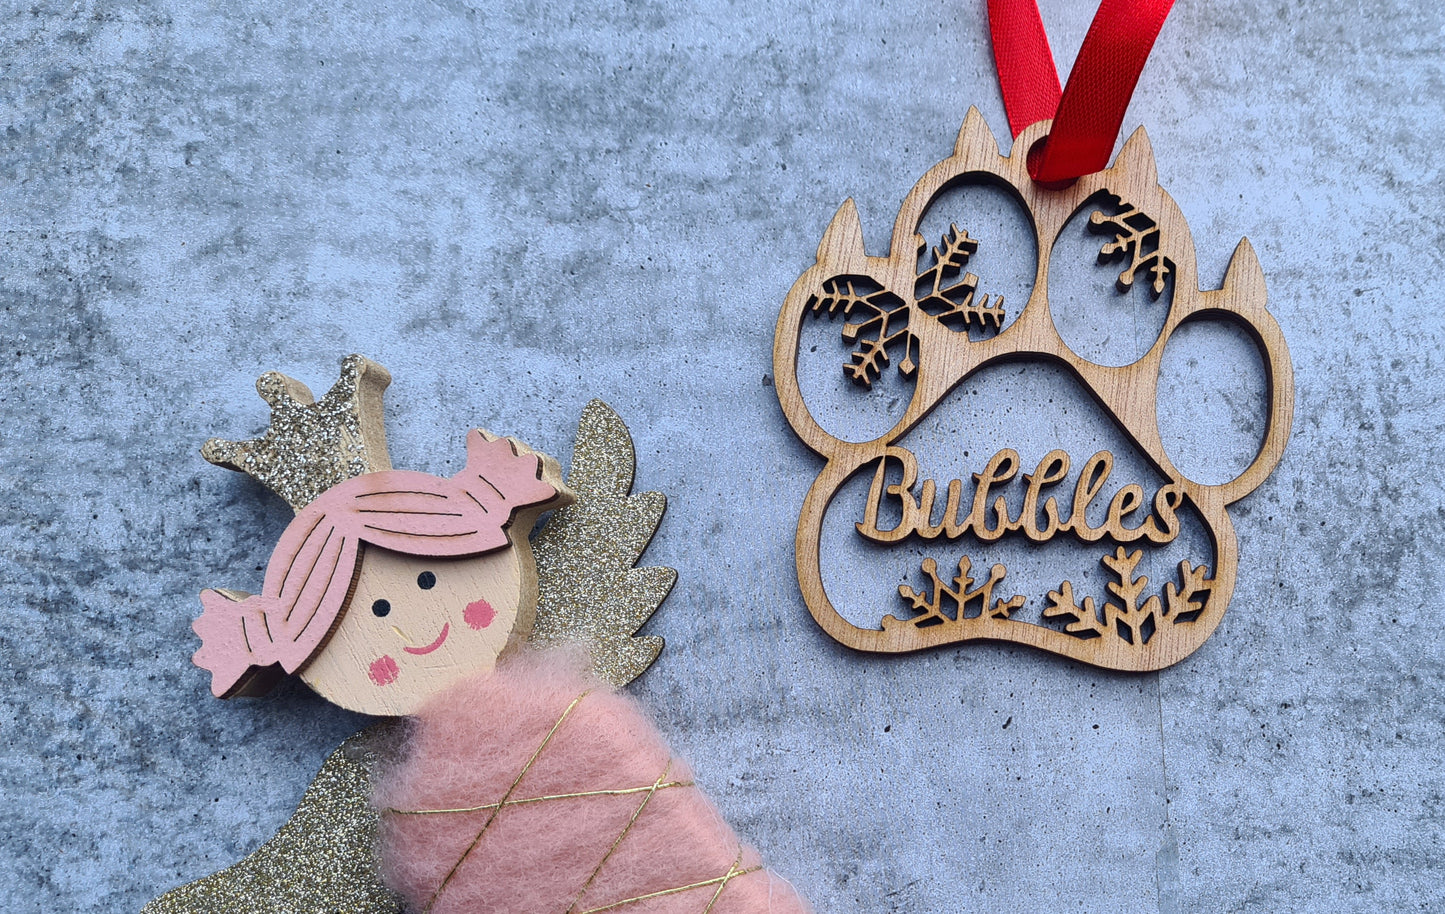 Personalised Wooden Christmas ornaments